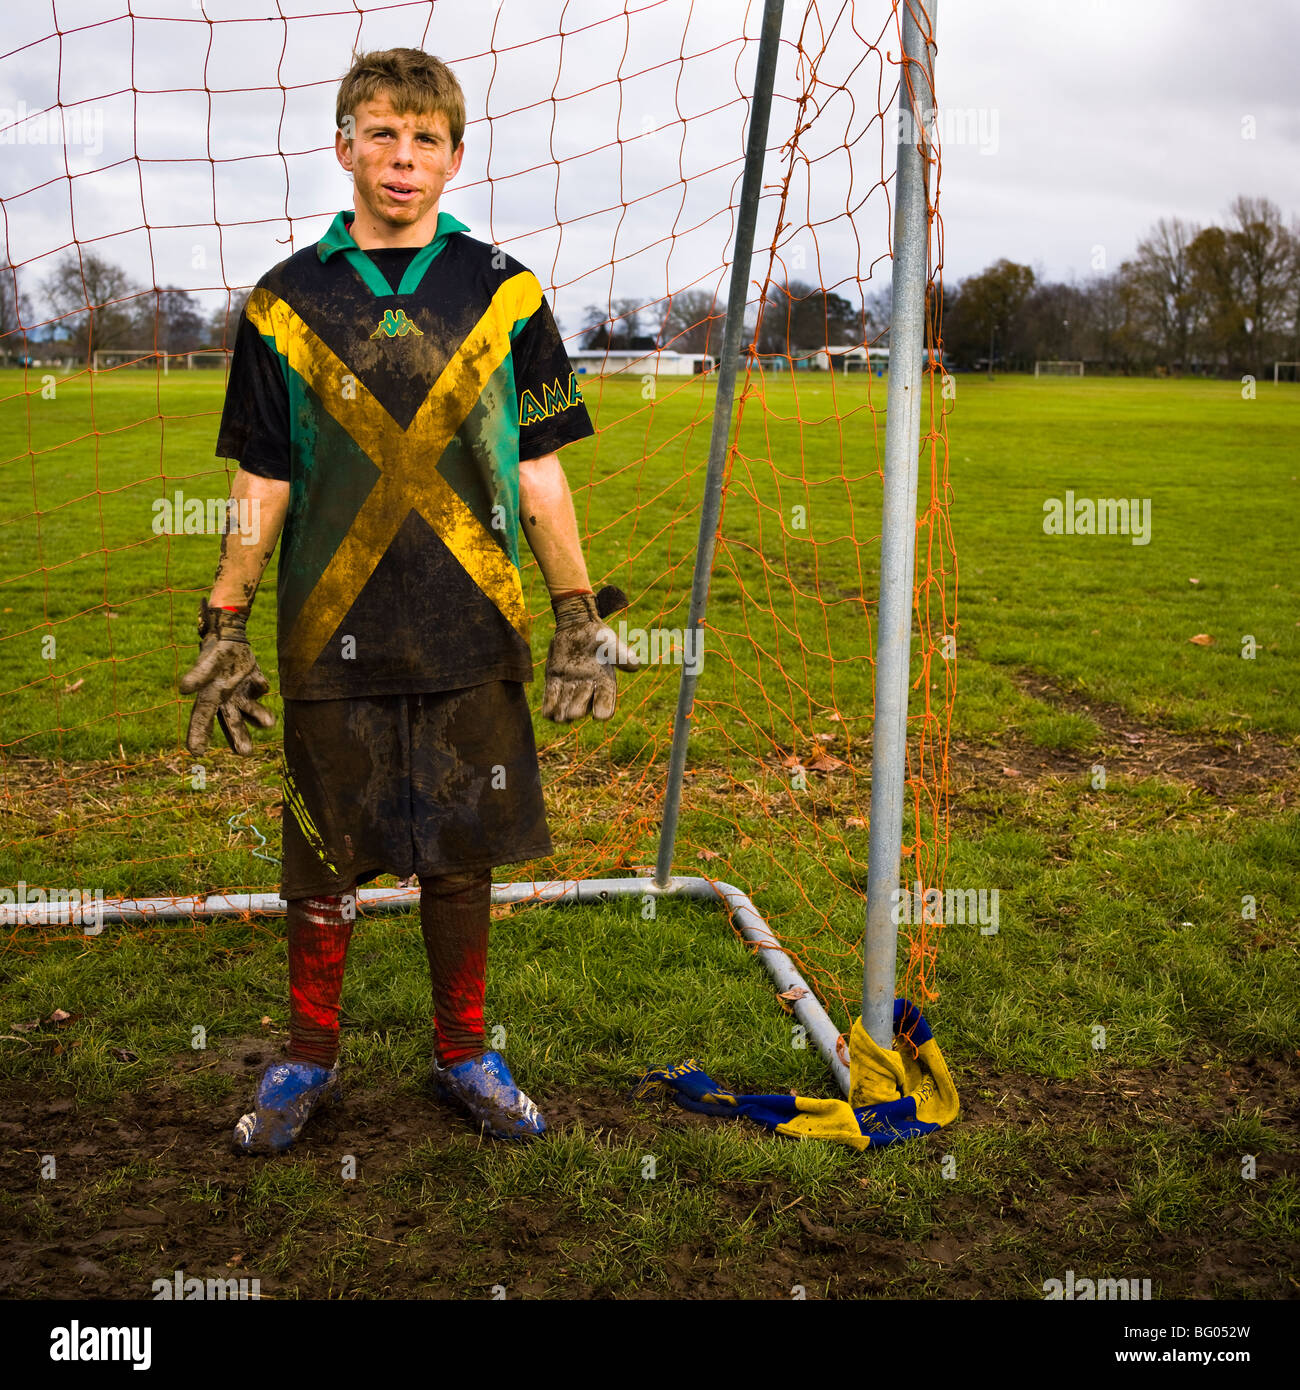 Two dirty teenagers standing in goal mouth after football/soccer  practice, Cambridge New Zealand Stock Photo